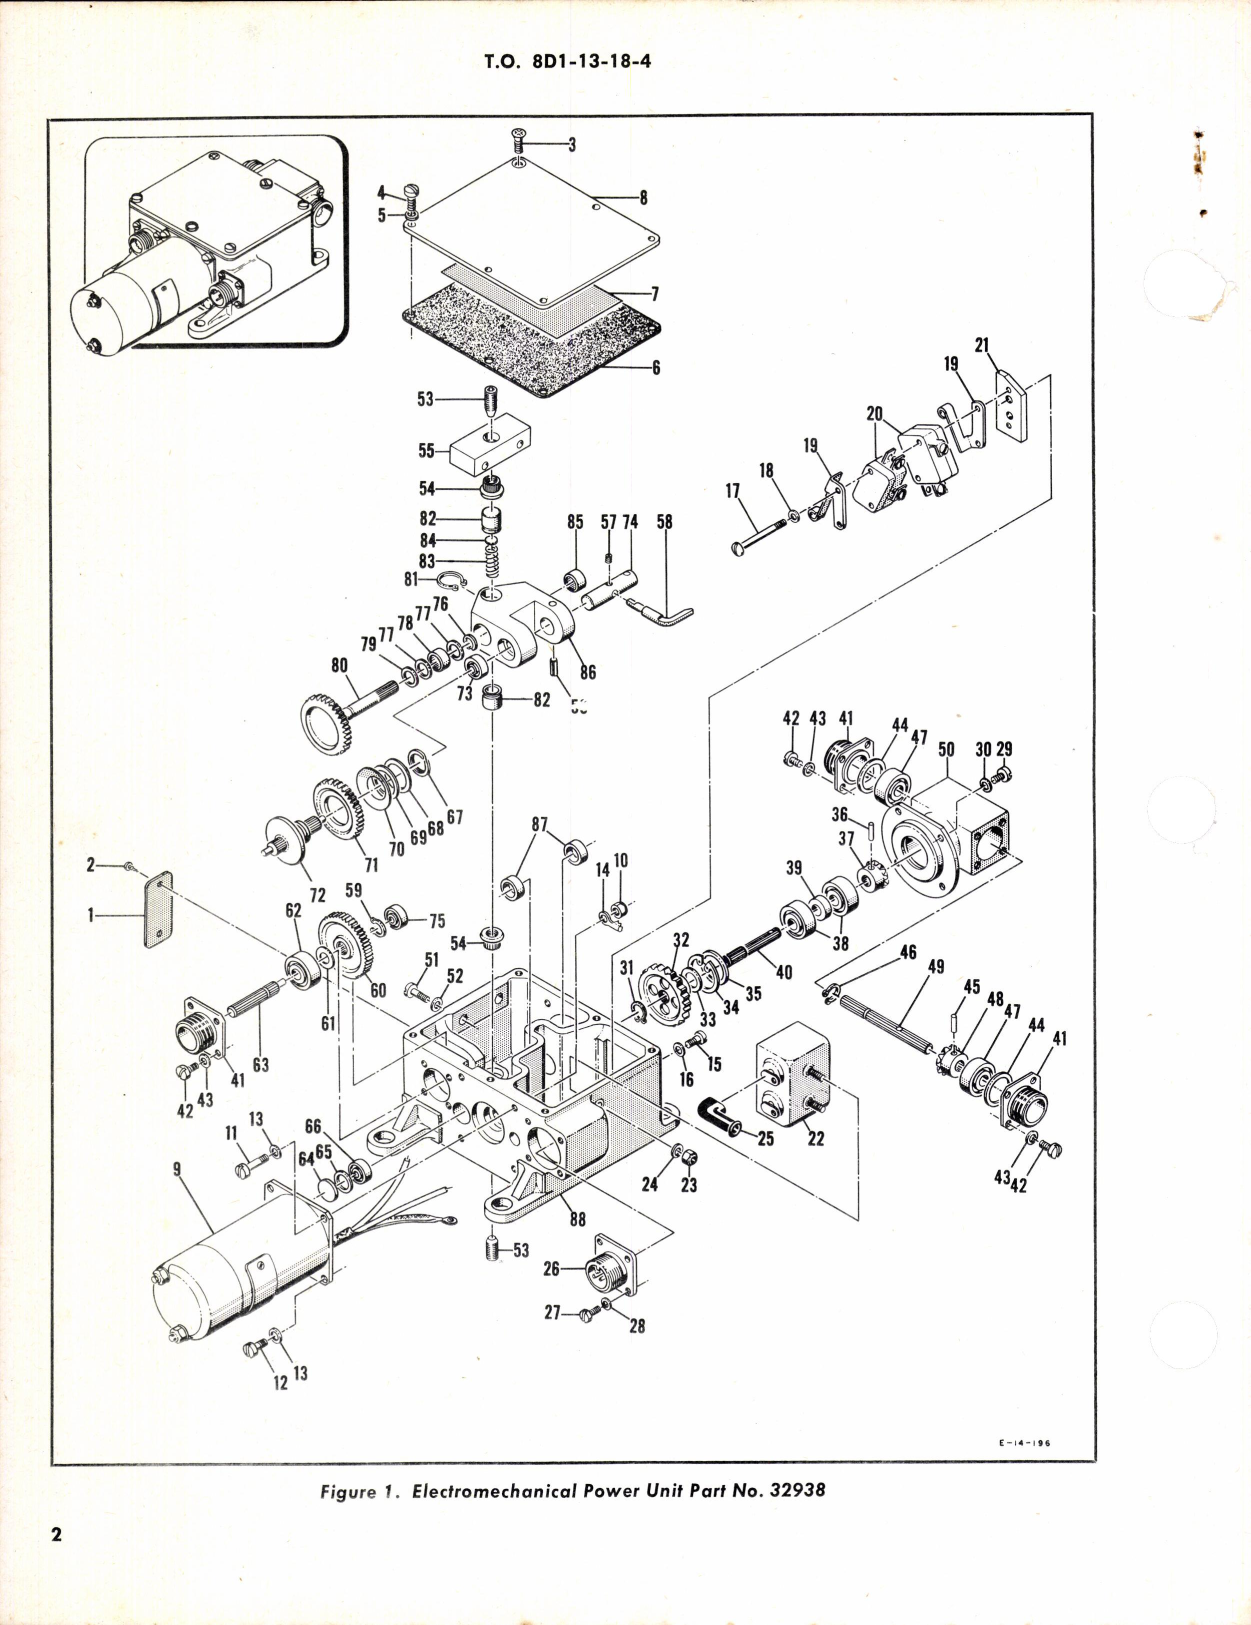 Sample page 2 from AirCorps Library document: Illustrated Parts Breakdown Electromechanical Power Unit